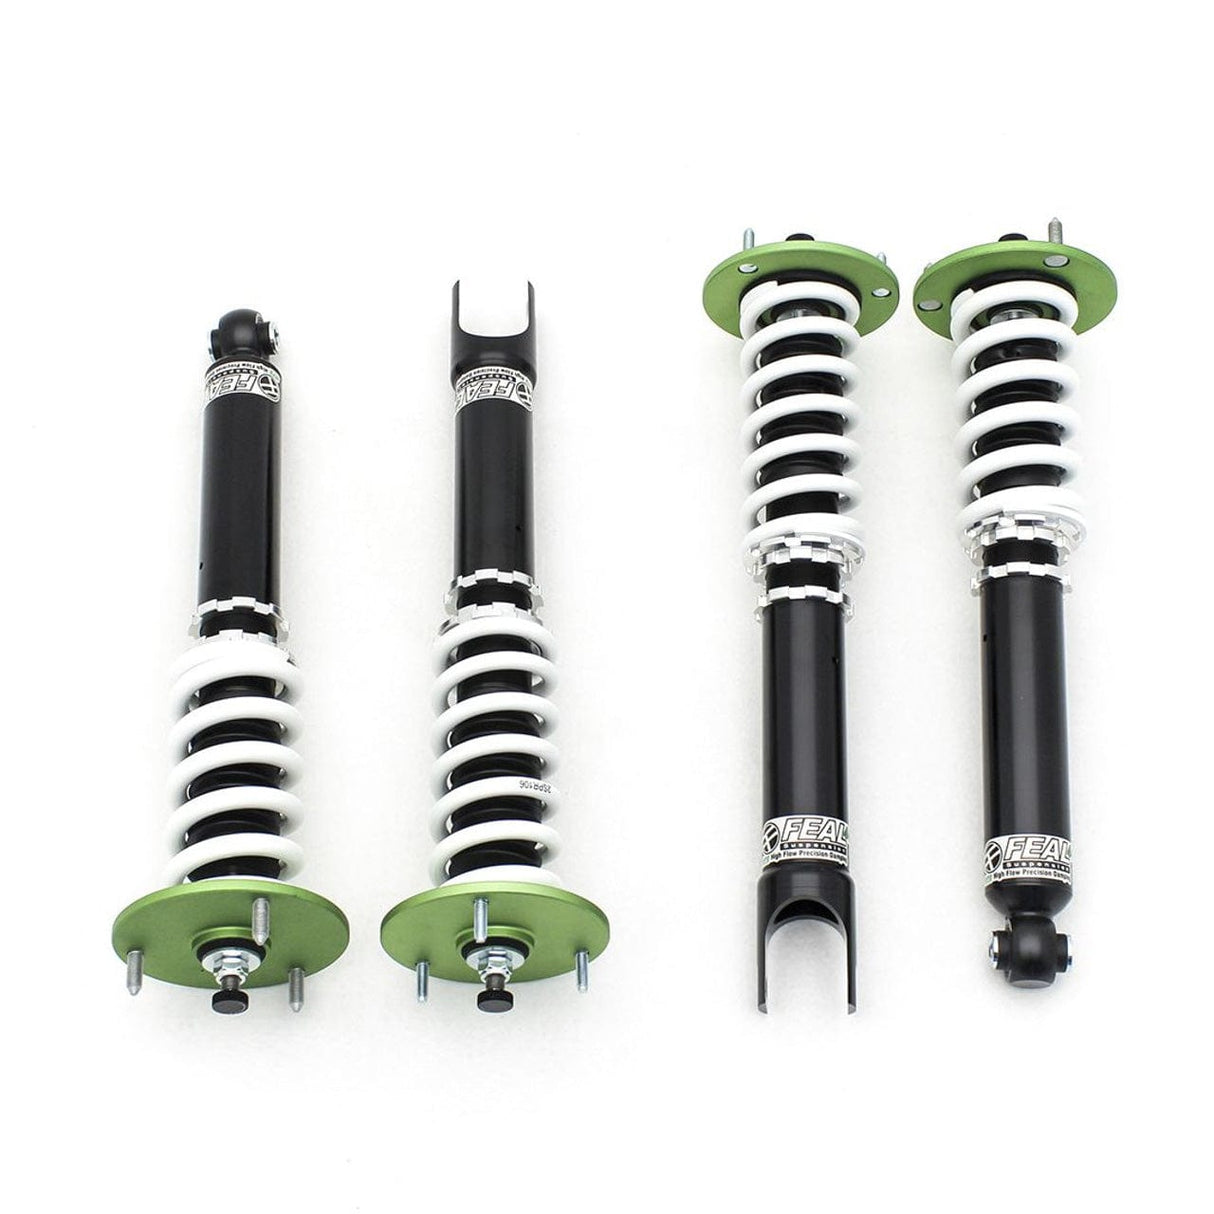 Feal 441 Coilovers - 1999-2002 Nissan Skyline R34 GT-T RWD